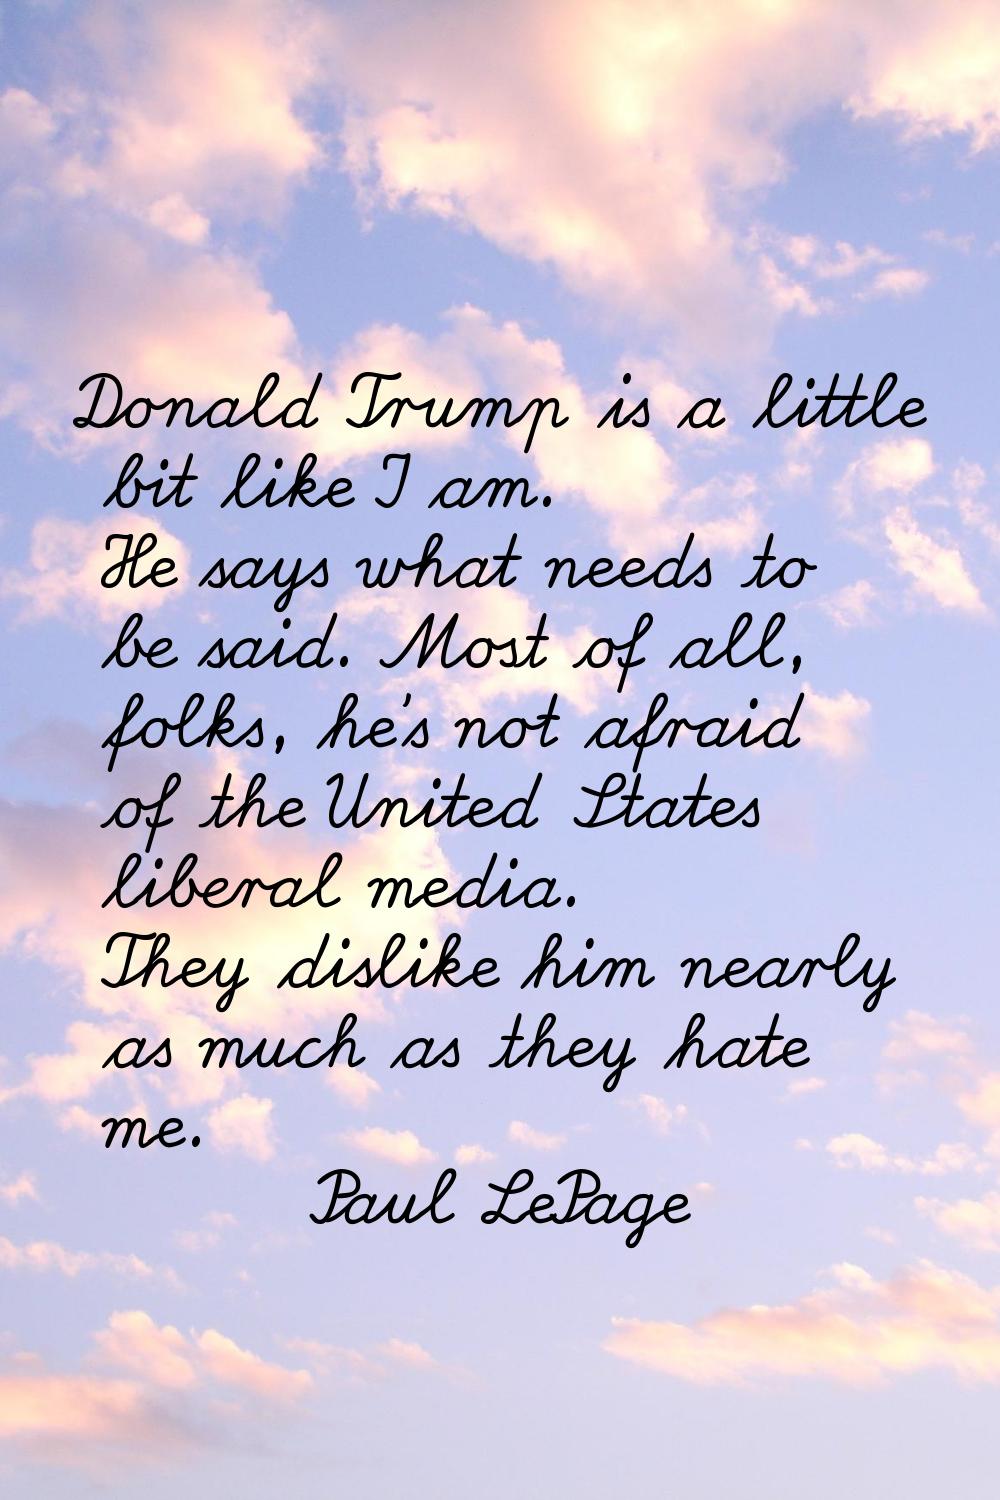 Donald Trump is a little bit like I am. He says what needs to be said. Most of all, folks, he's not